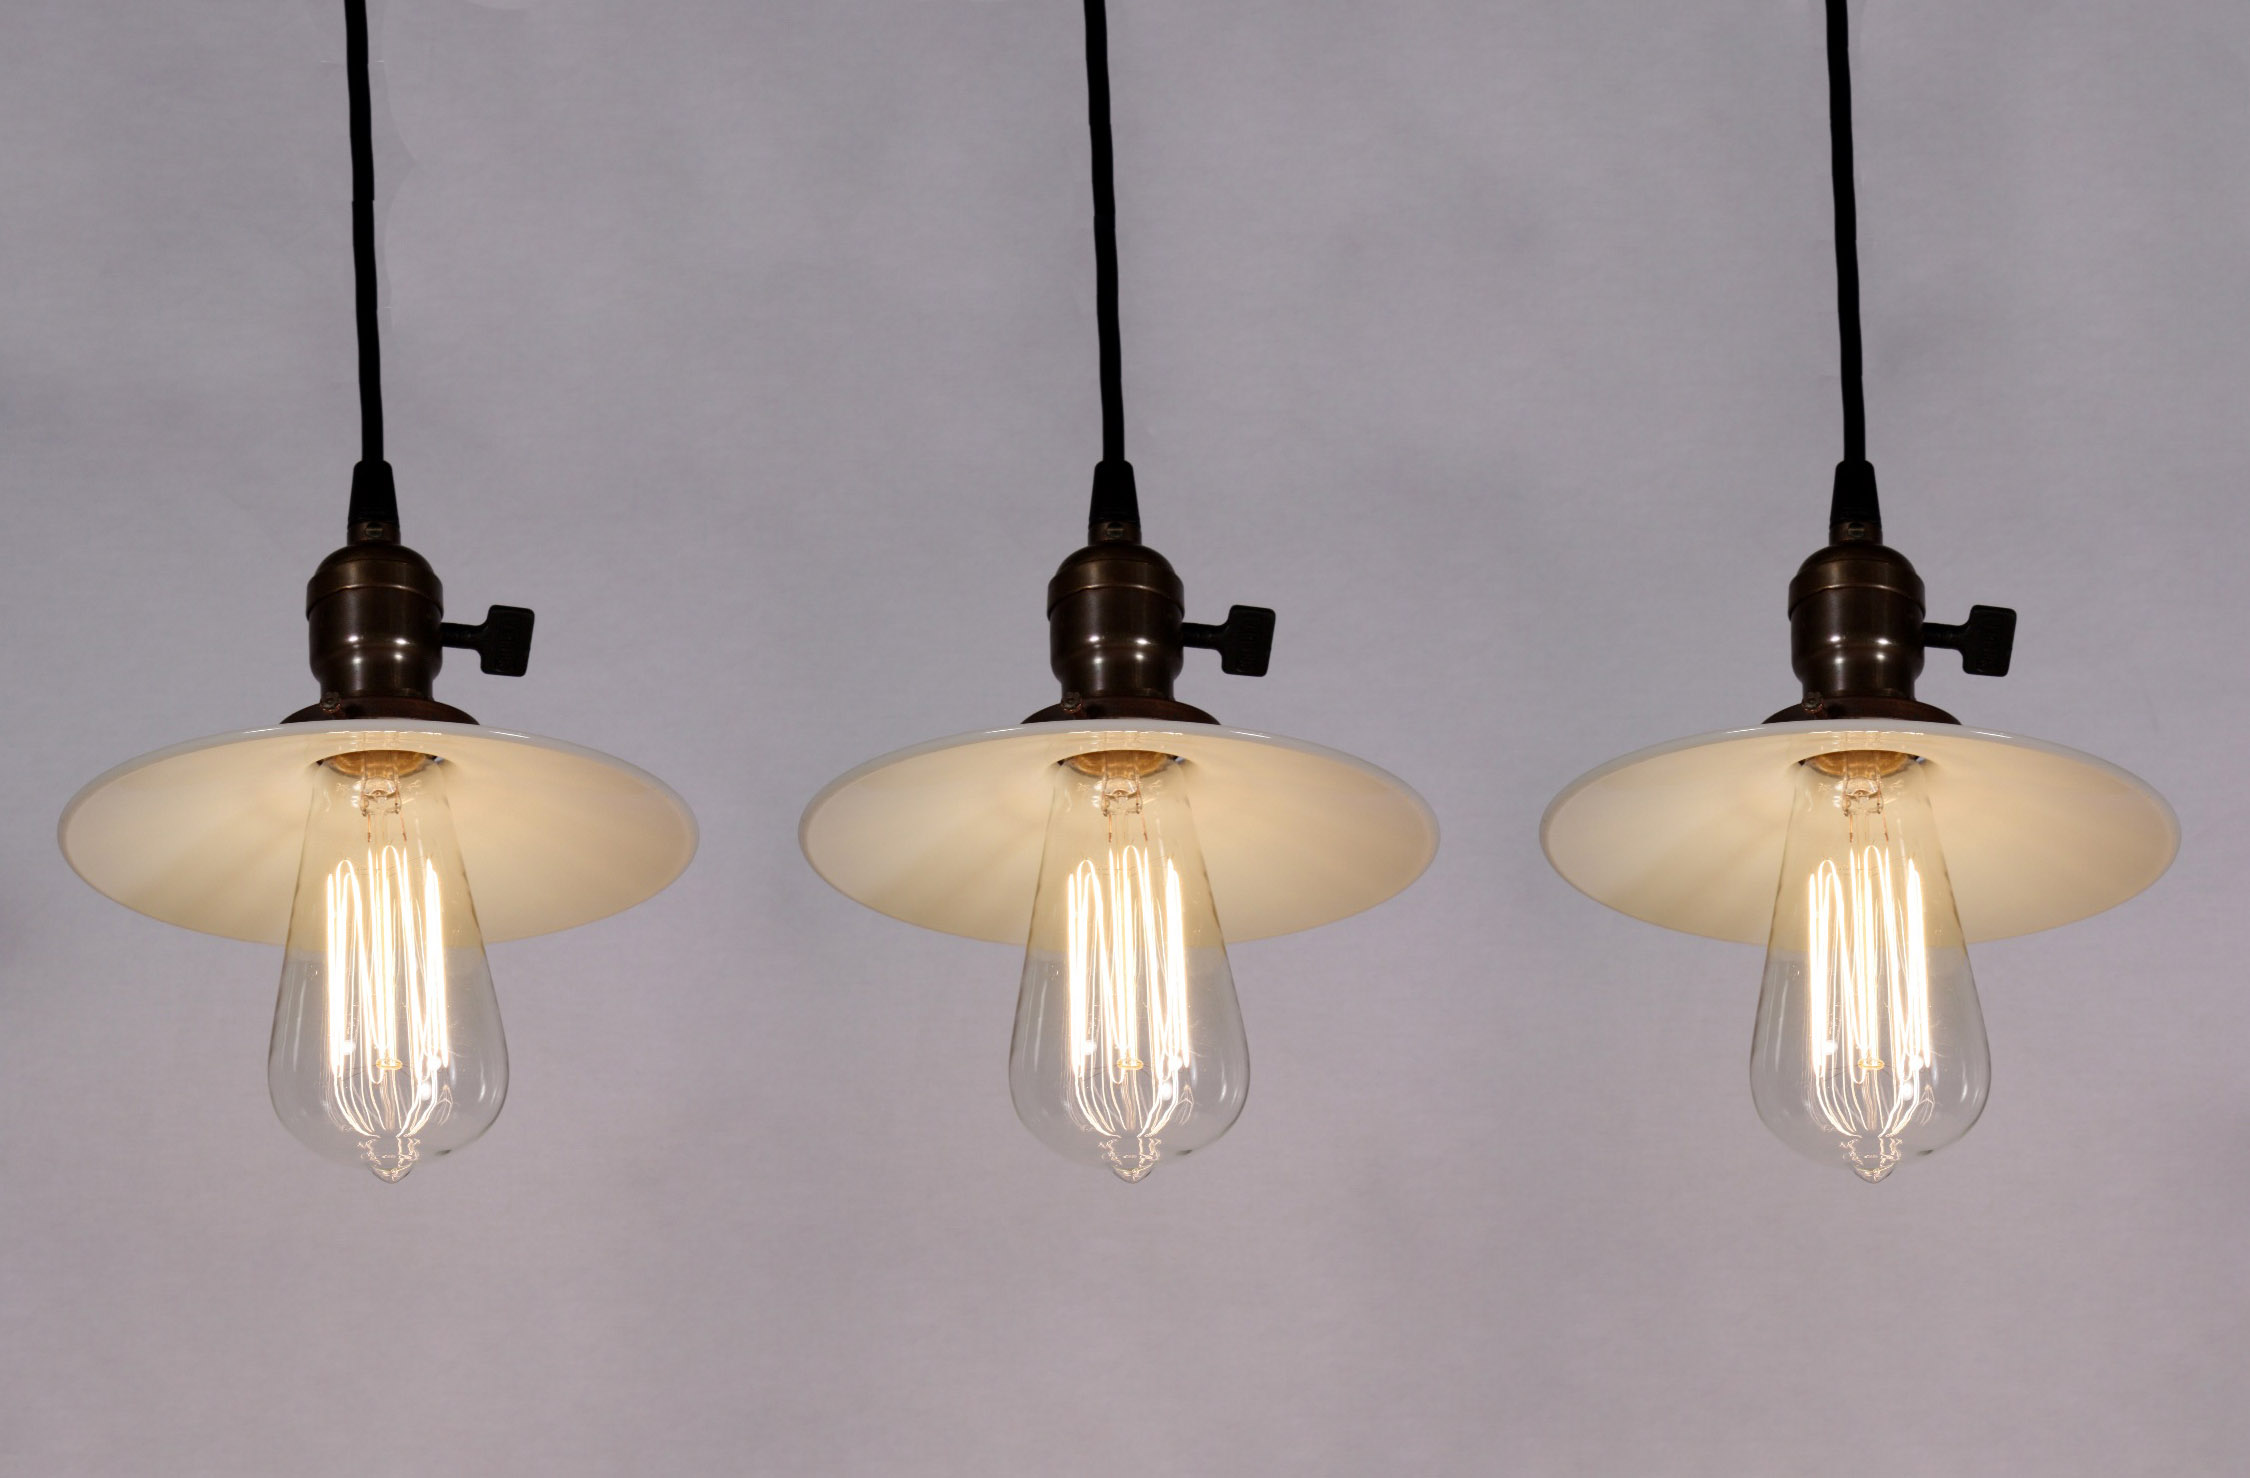 SOLD Set of Three Matching Antique Industrial Pendant Lights with Milk Glass Shades, c. 1905-0